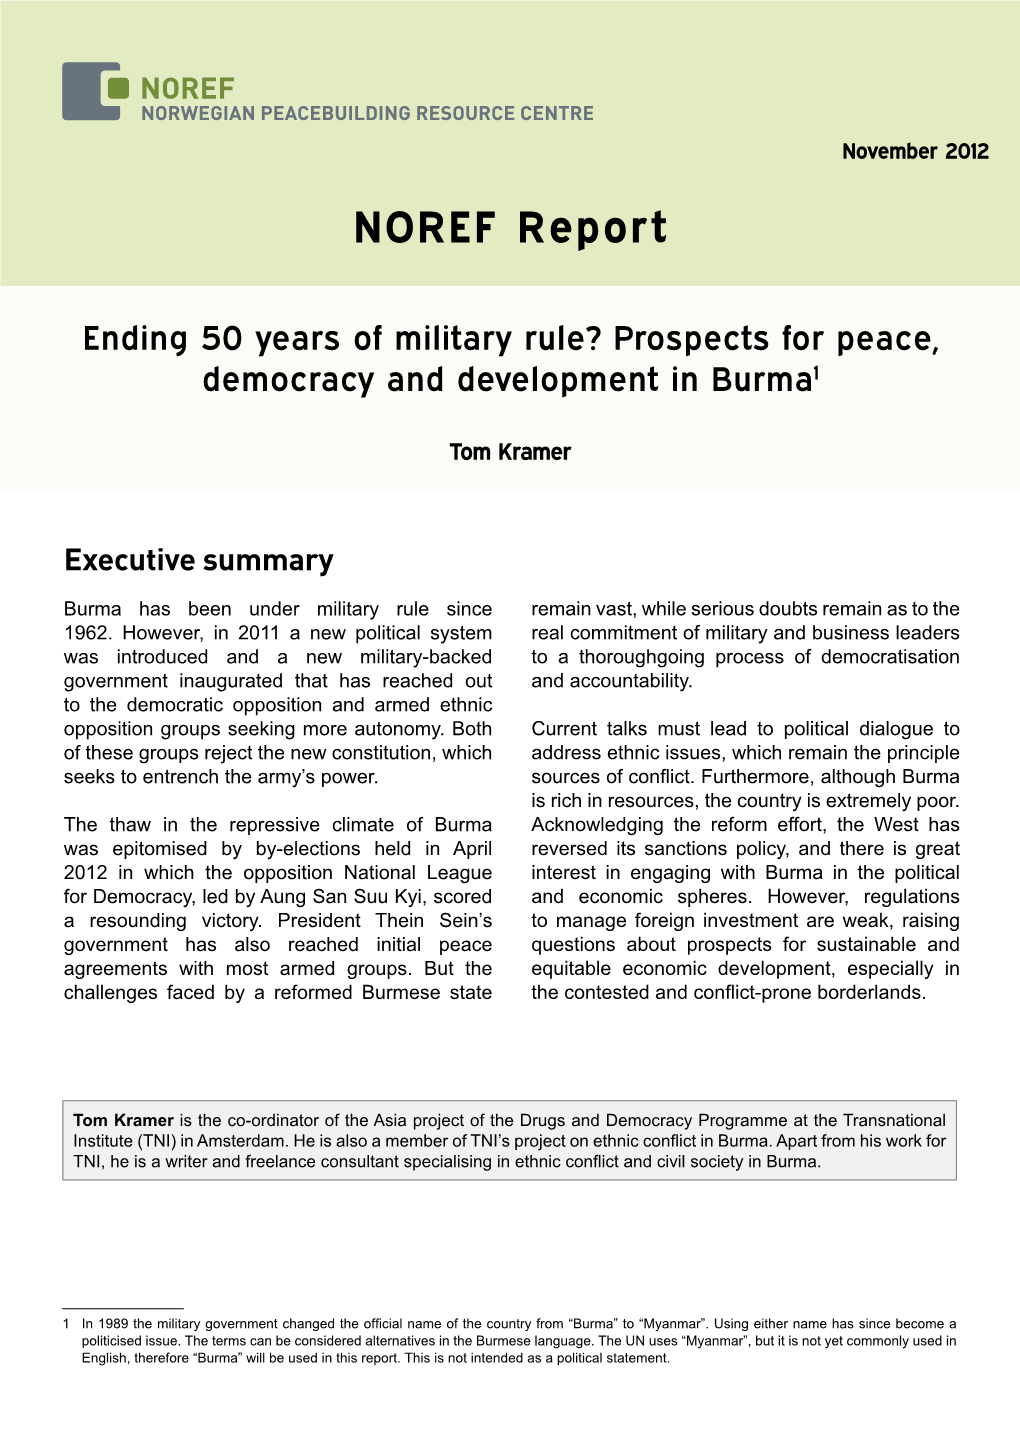 Download NOREF Report: Ending 50 Years of Military Rule